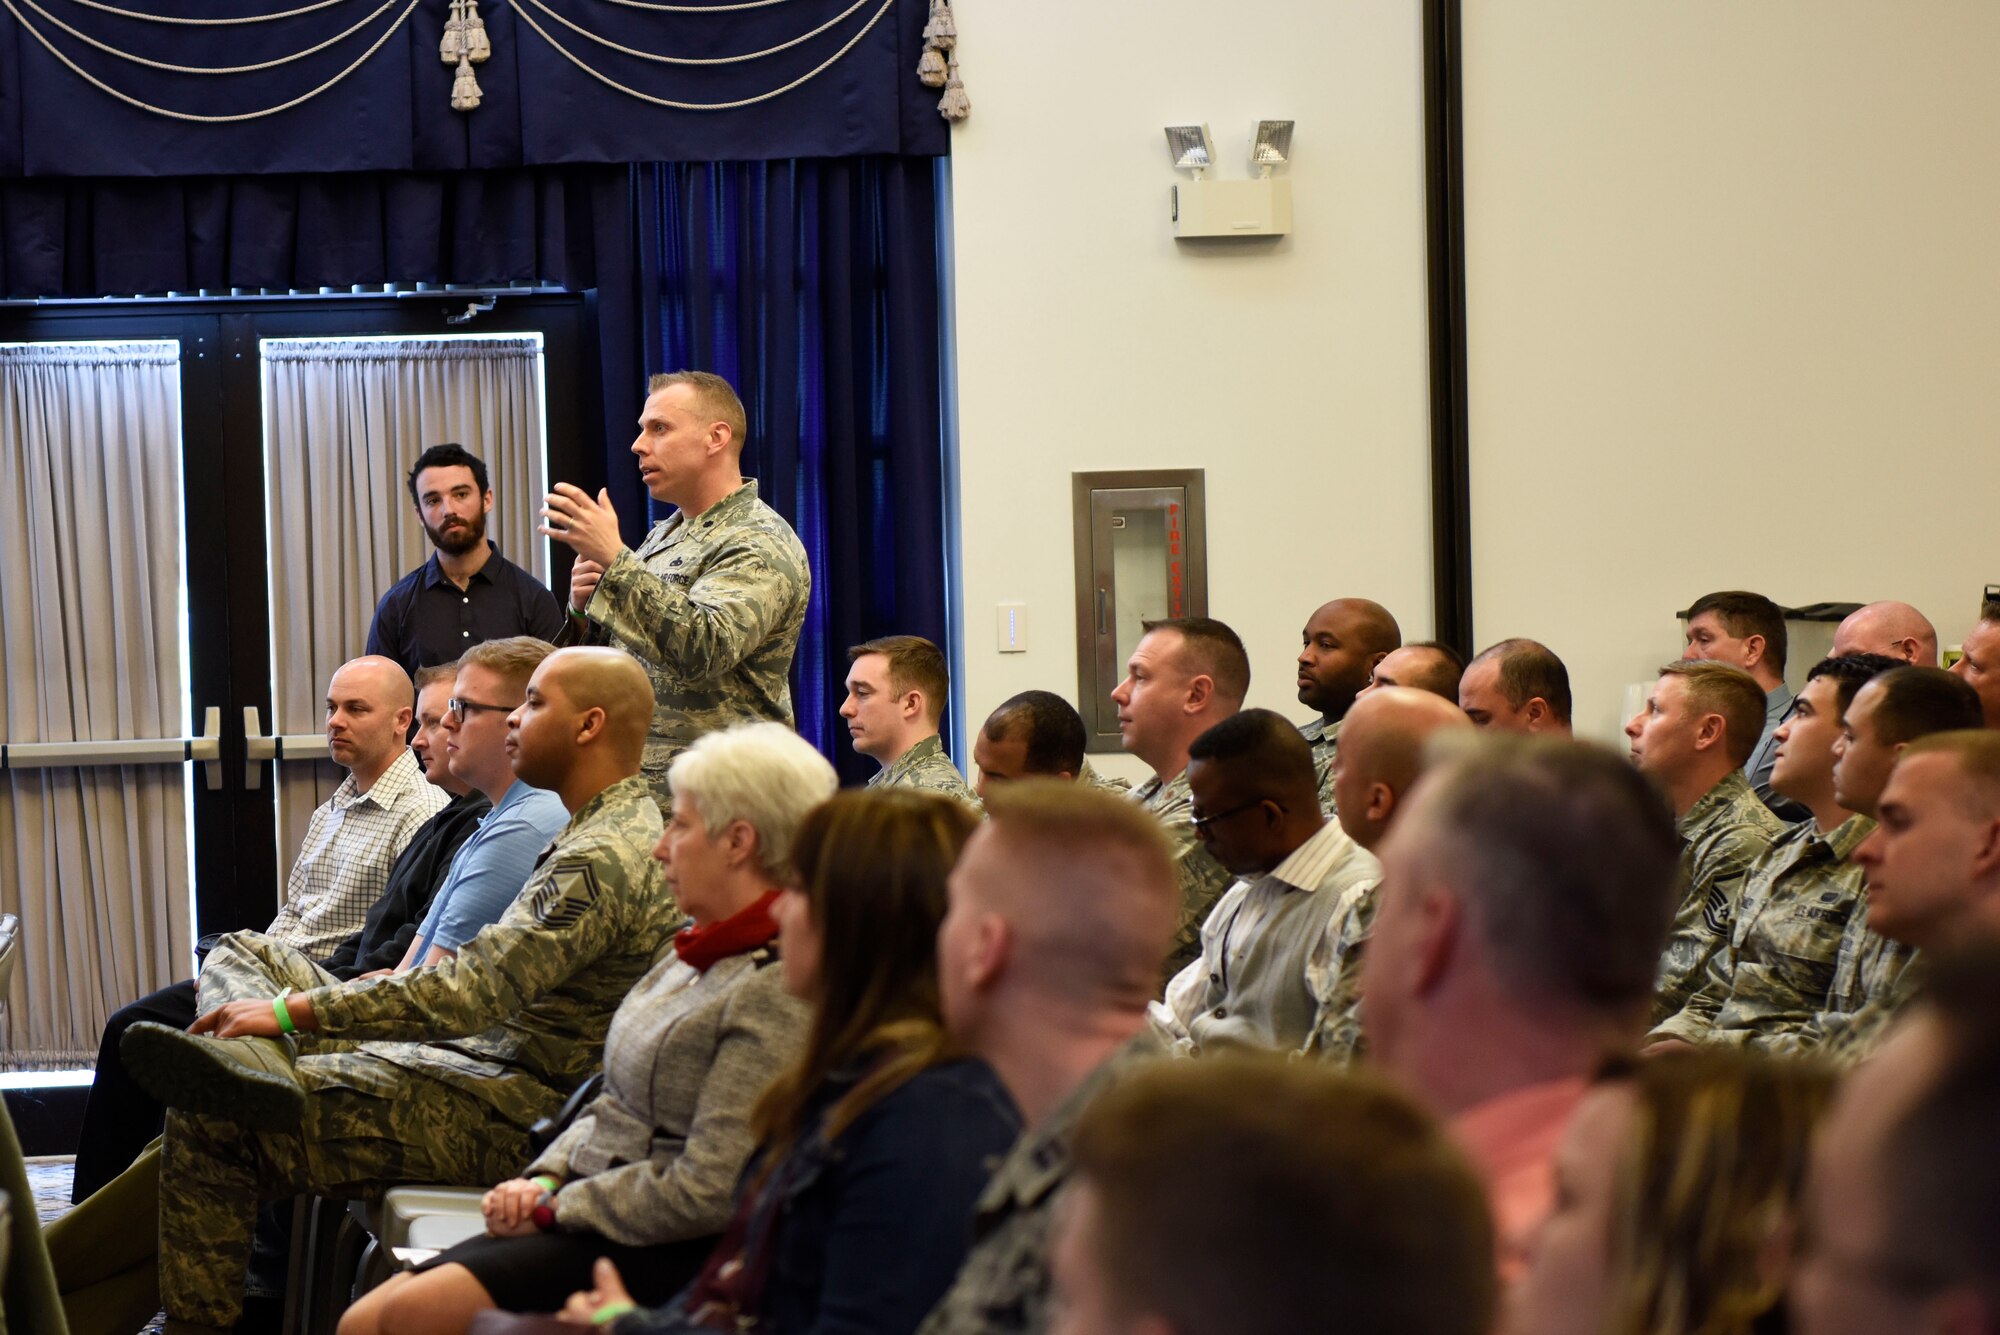 Team Dover members participate in the second annual Hiring Our Heroes Military Transition Summit April 12, 2018, at Dover Air Force Base, Del. The event was sponsored by the U.S. Chamber of Commerce and Hiring Our Heroes. (U.S. Air Force photo by Airman 1st Class Zoe M. Wockenfuss)